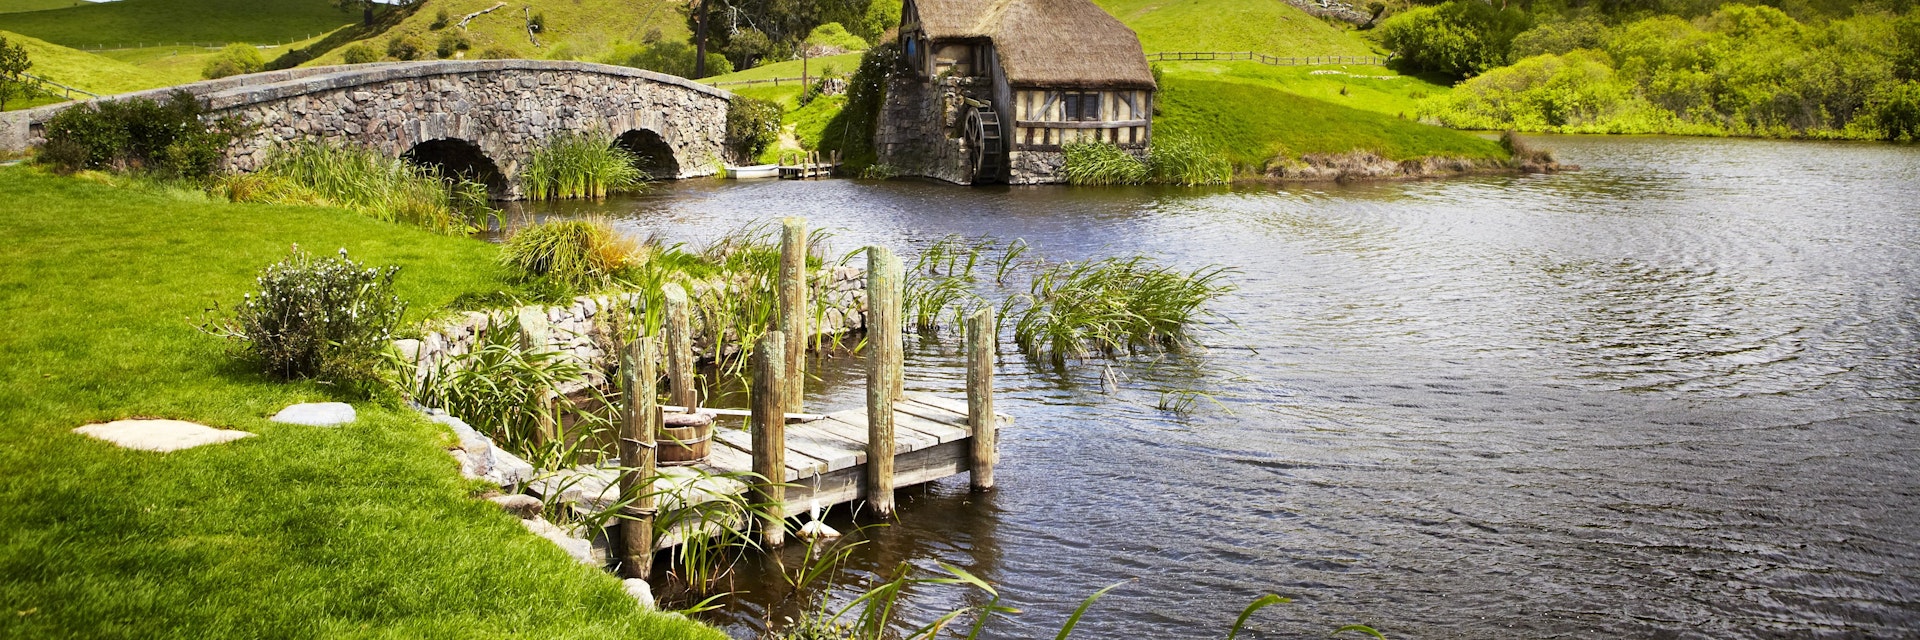 Lake in village of Hobbitville on Lord of the Rings film set.